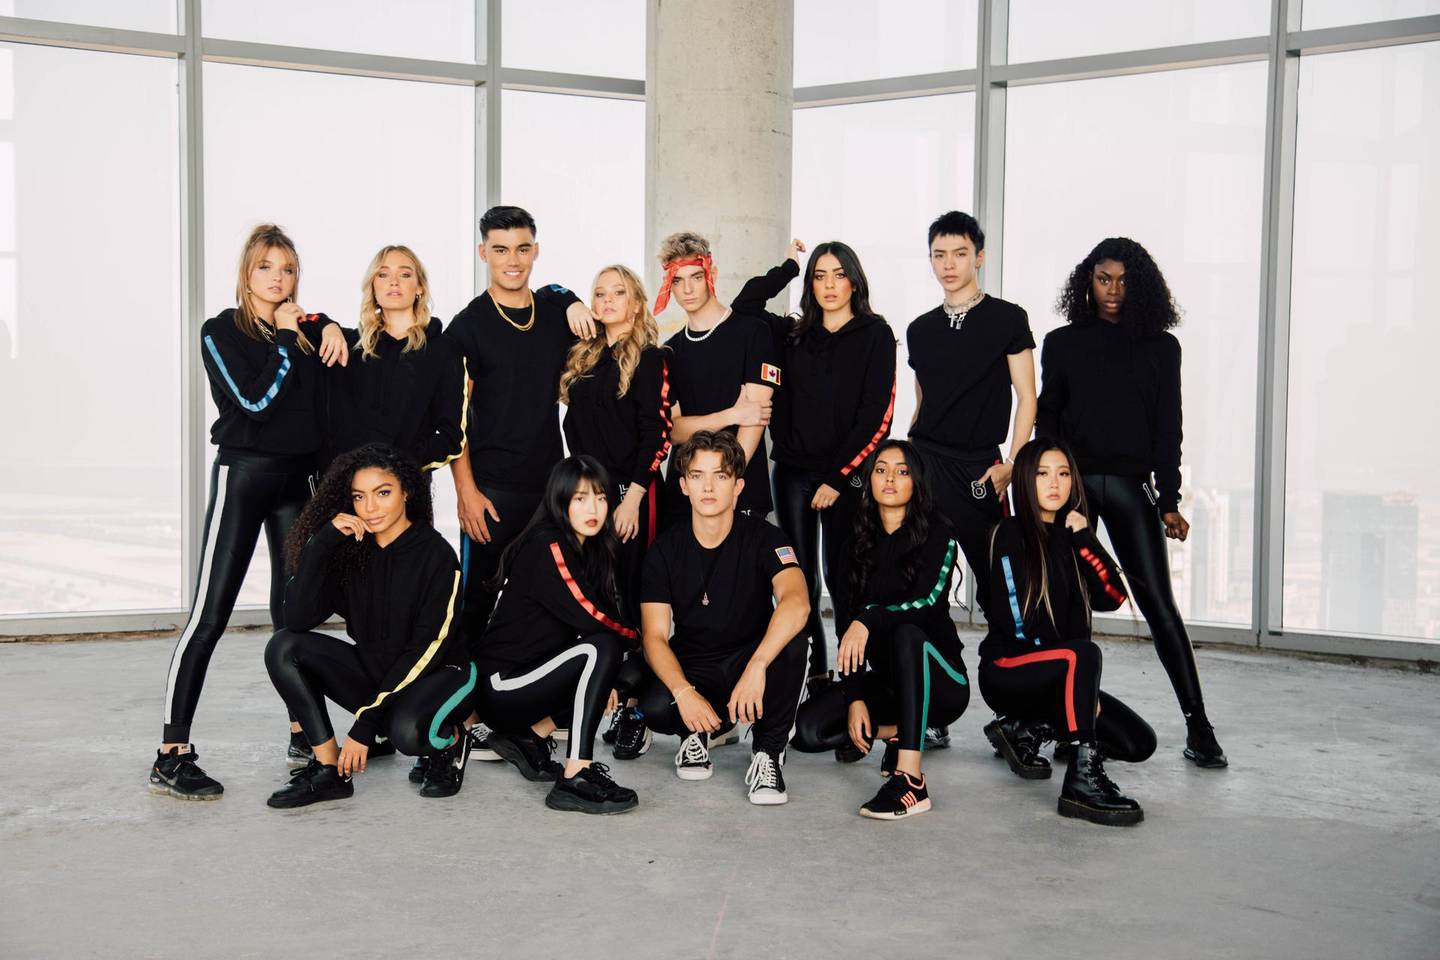 Global pop group Now United, formed by Simon Fuller. Courtesy XIX Entertainment